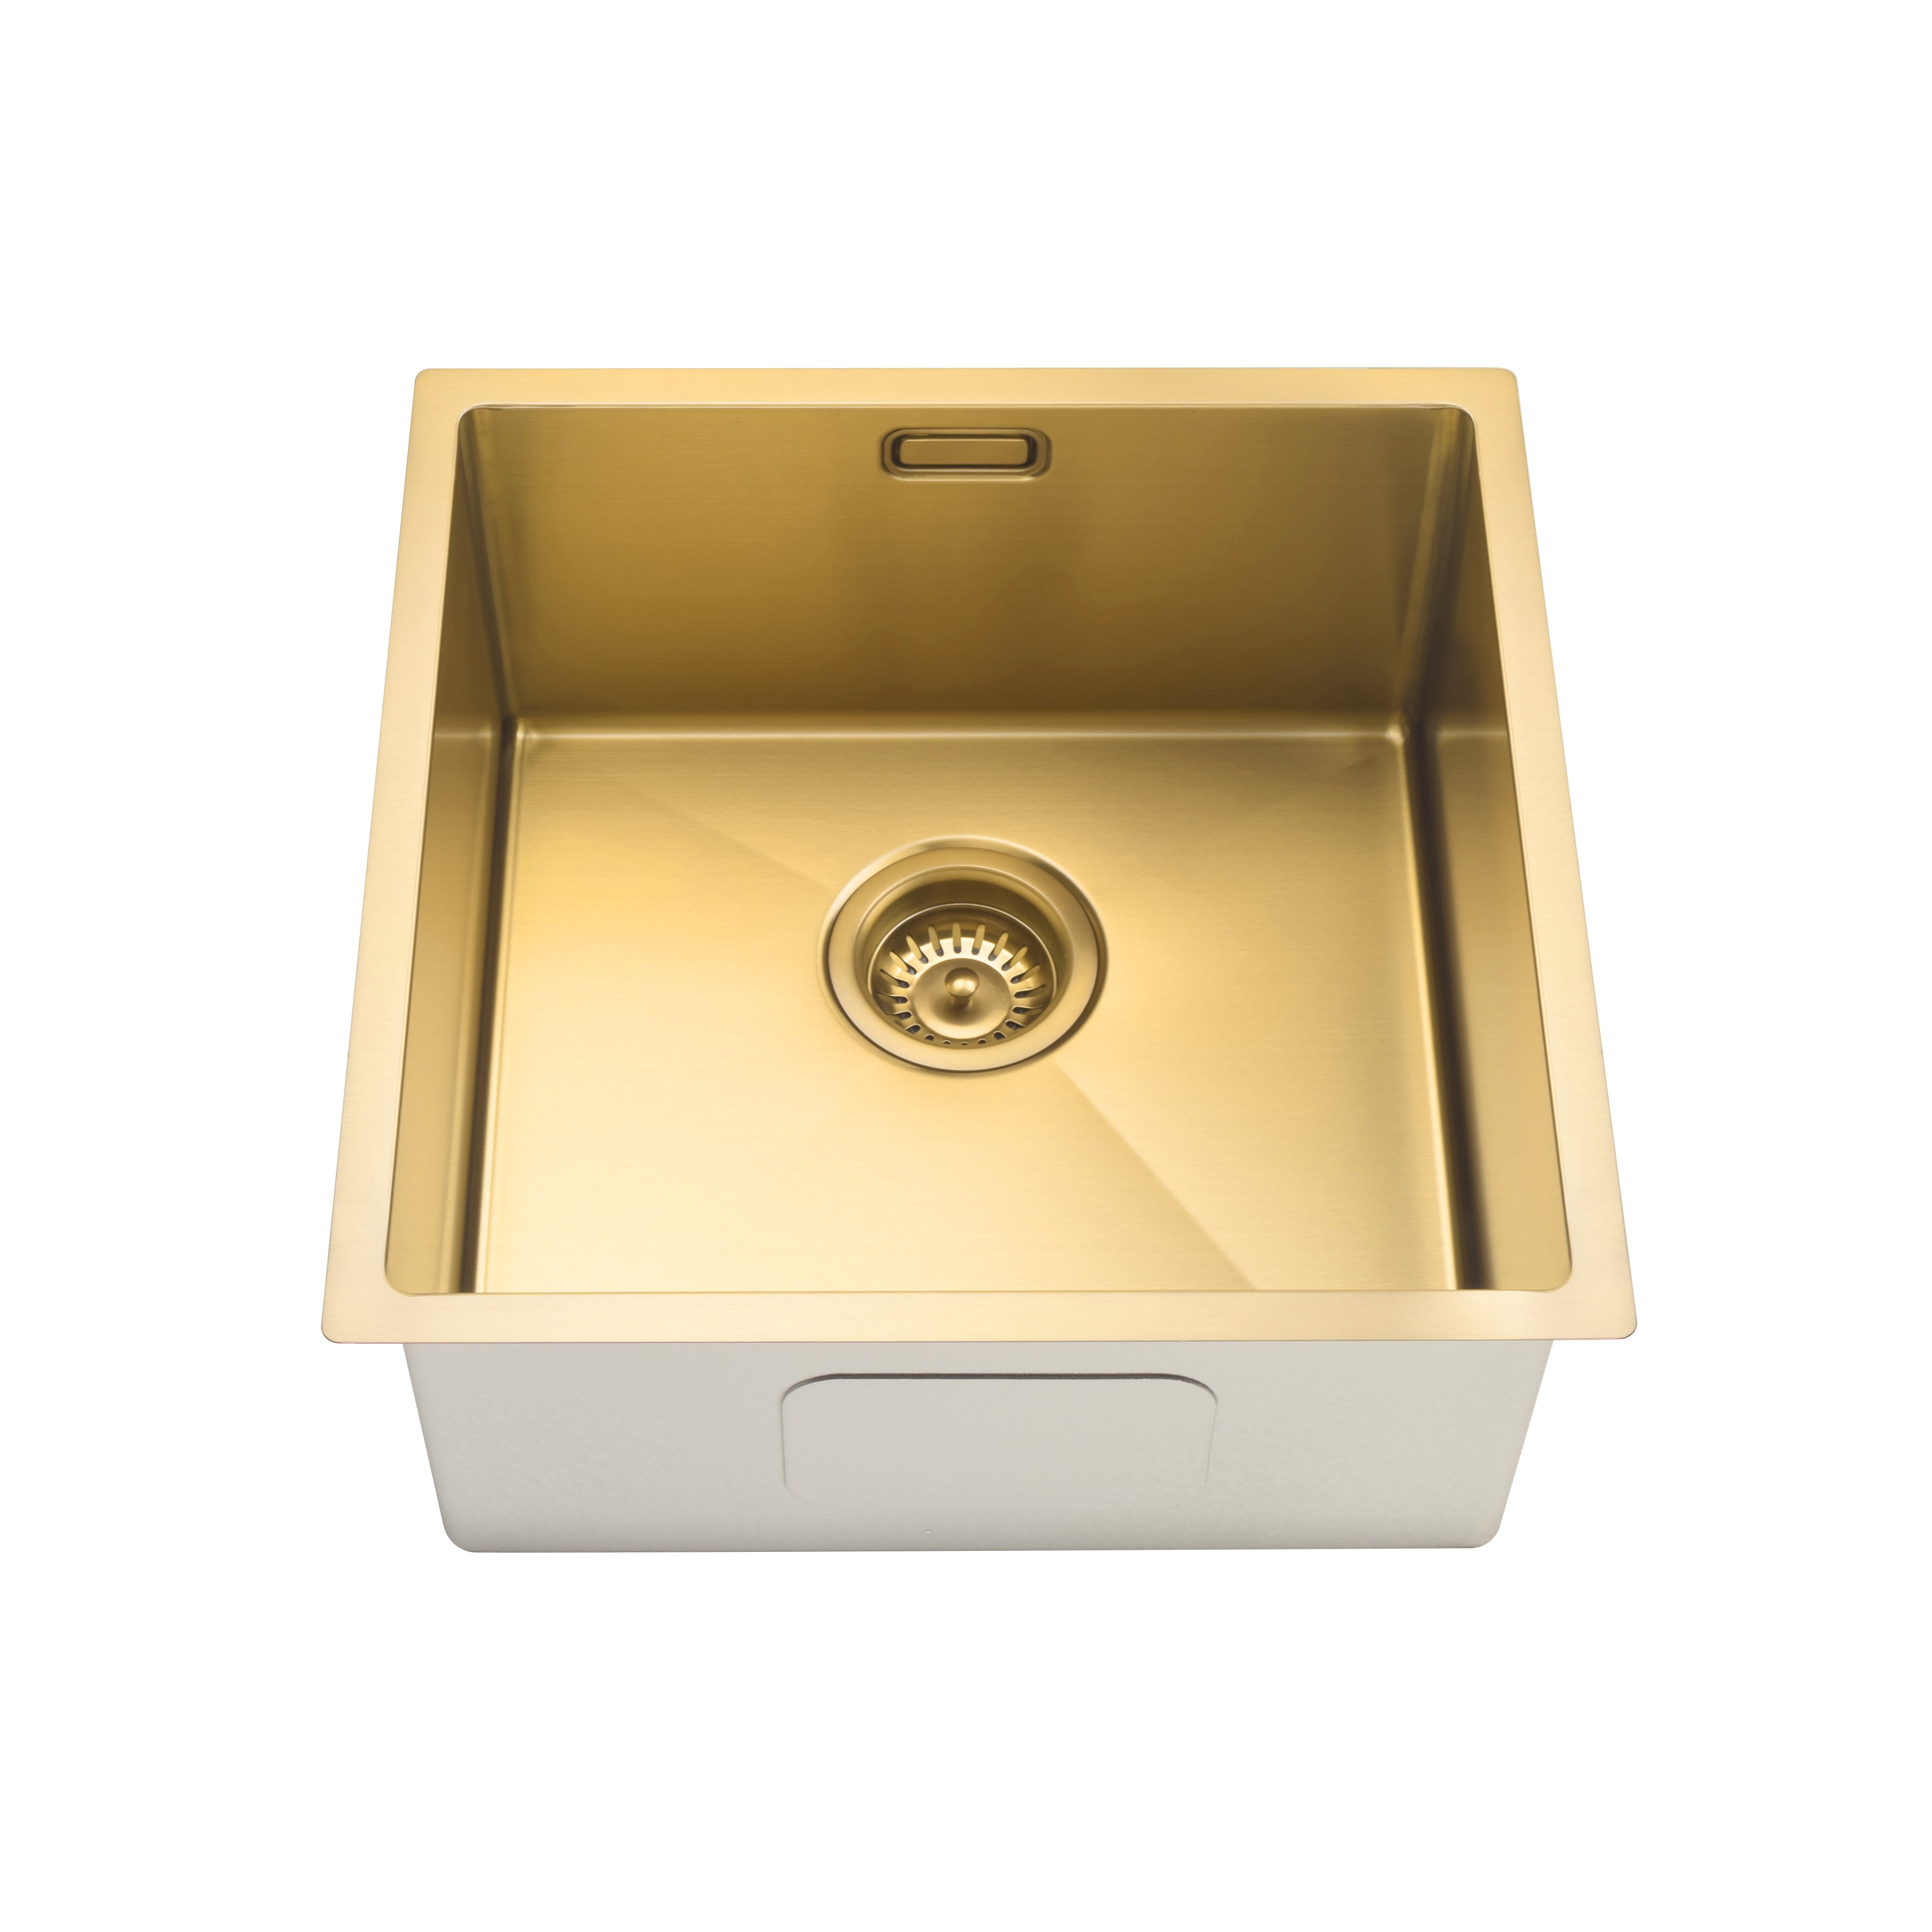 ASPEN 400X400 PVD 304 STAINLESS STEEL SINKS - 5 COLOURS